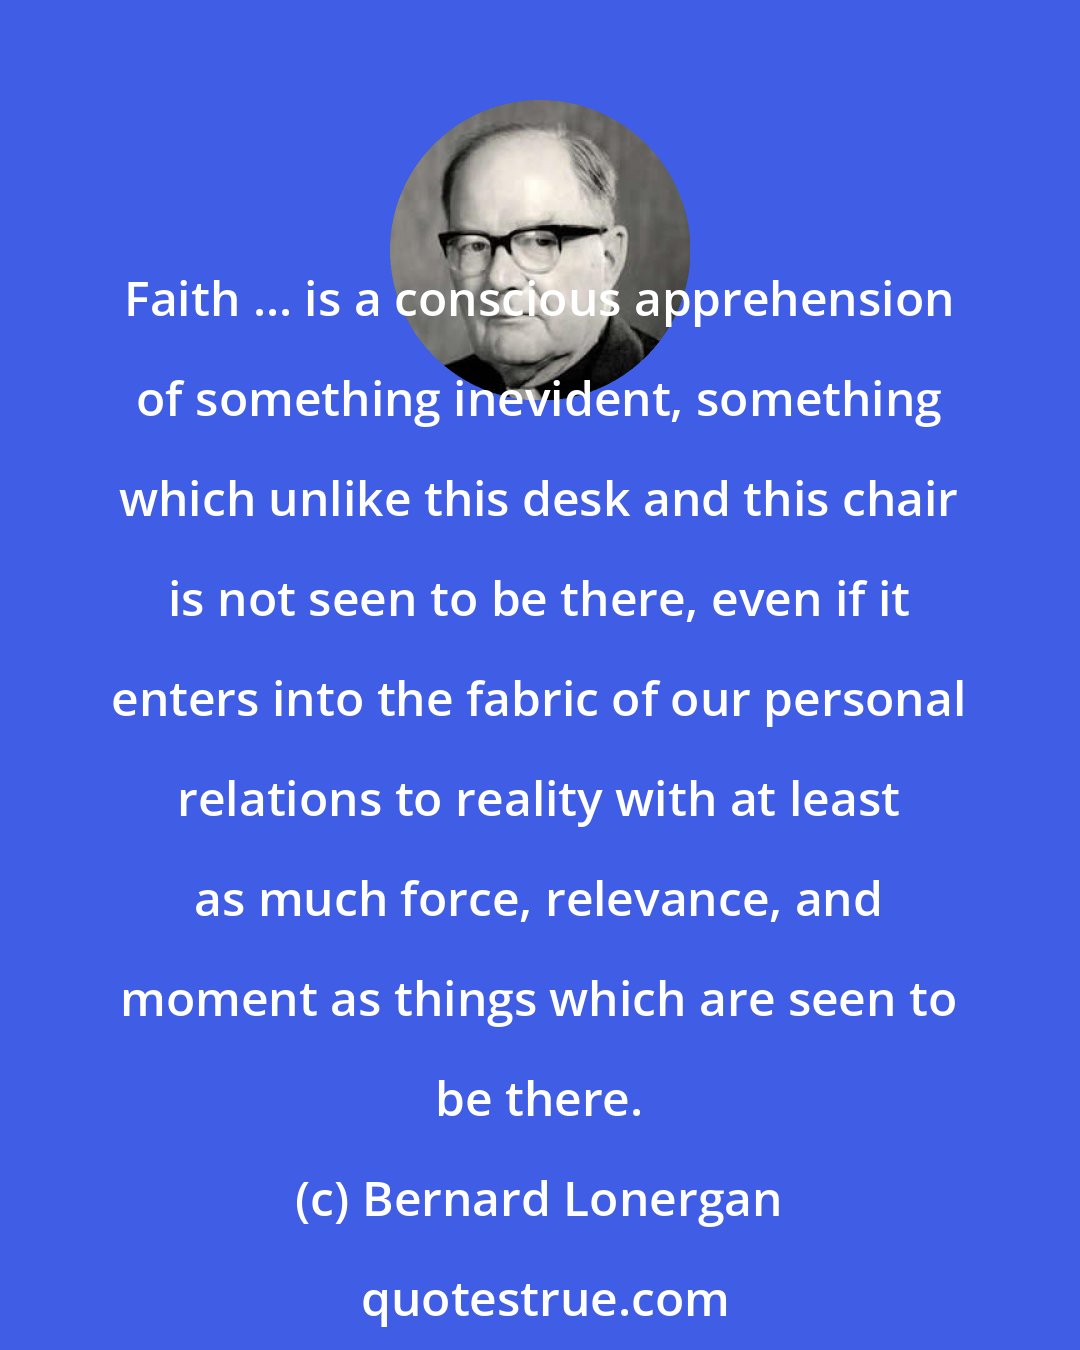 Bernard Lonergan: Faith ... is a conscious apprehension of something inevident, something which unlike this desk and this chair is not seen to be there, even if it enters into the fabric of our personal relations to reality with at least as much force, relevance, and moment as things which are seen to be there.